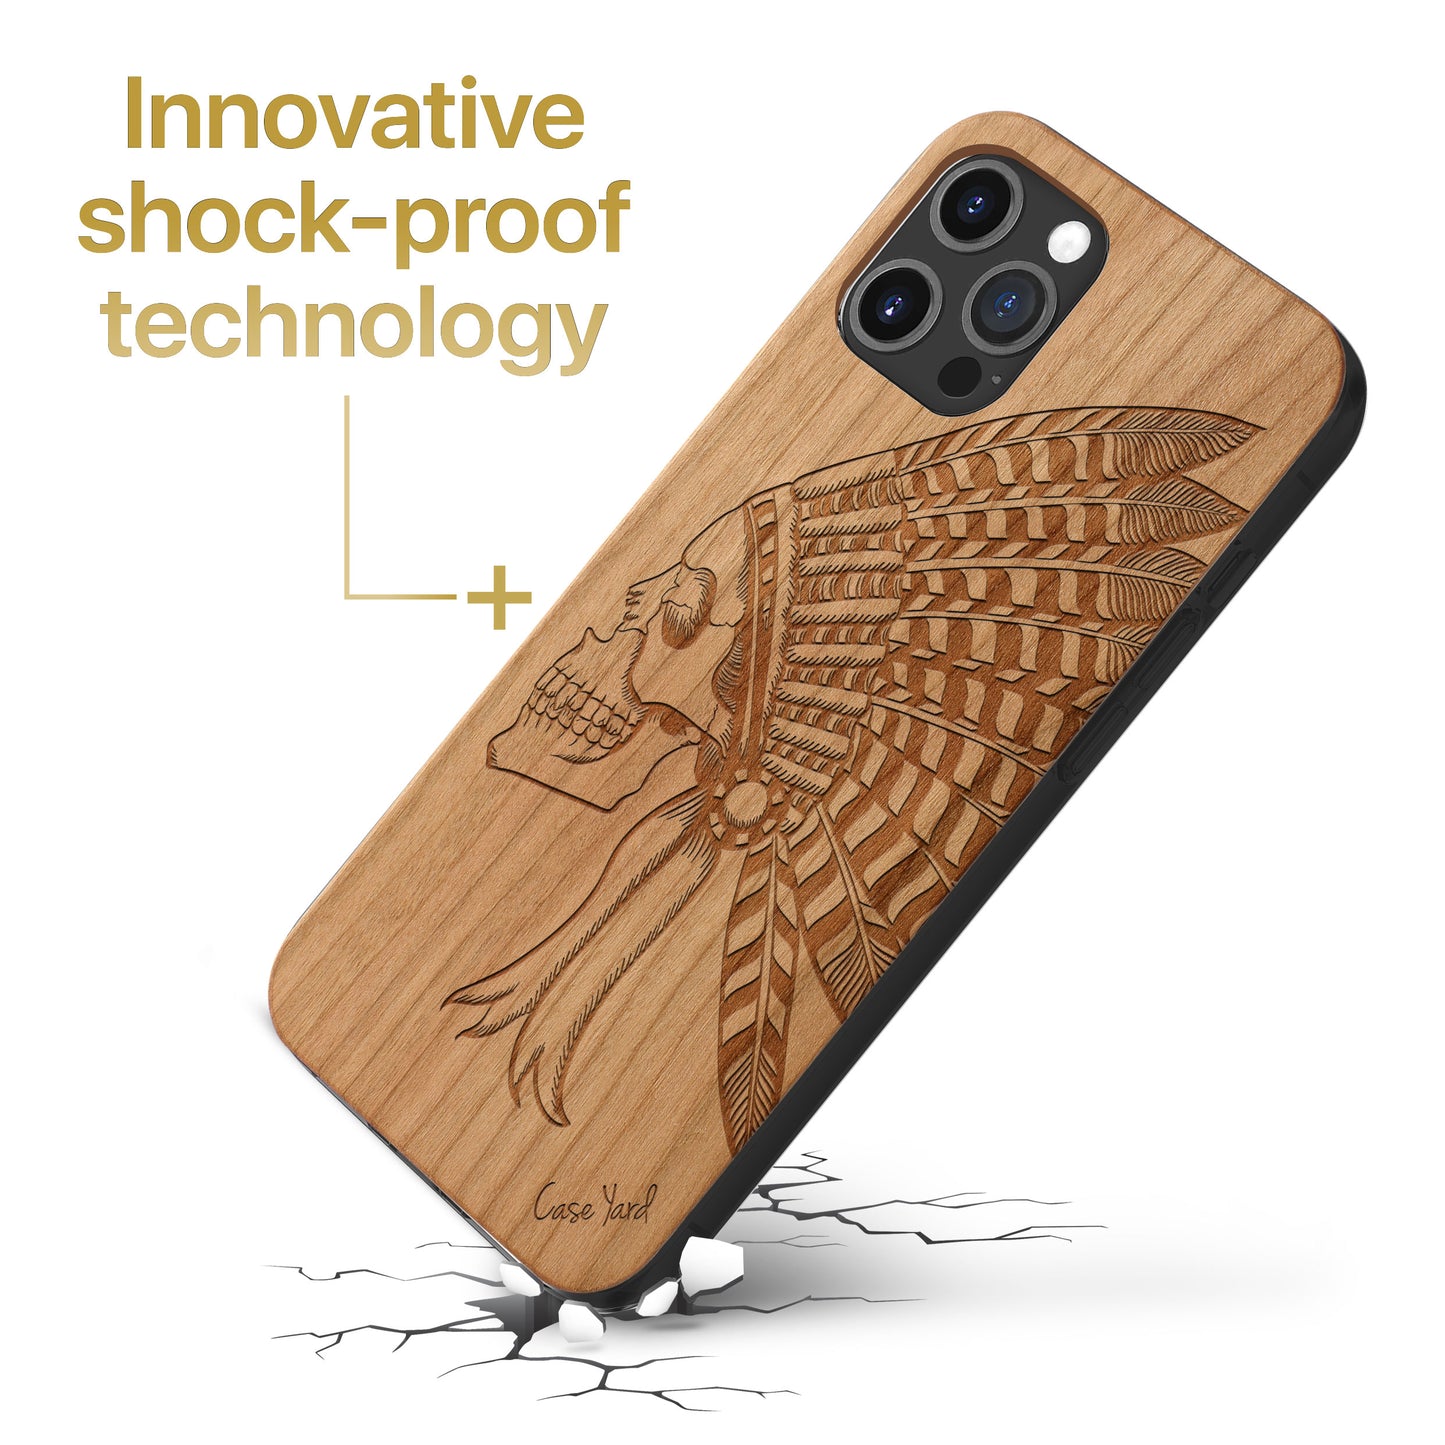 Wooden Cell Phone Case Cover, Laser Engraved case for iPhone & Samsung phone Indian Chief Skull Wood Design